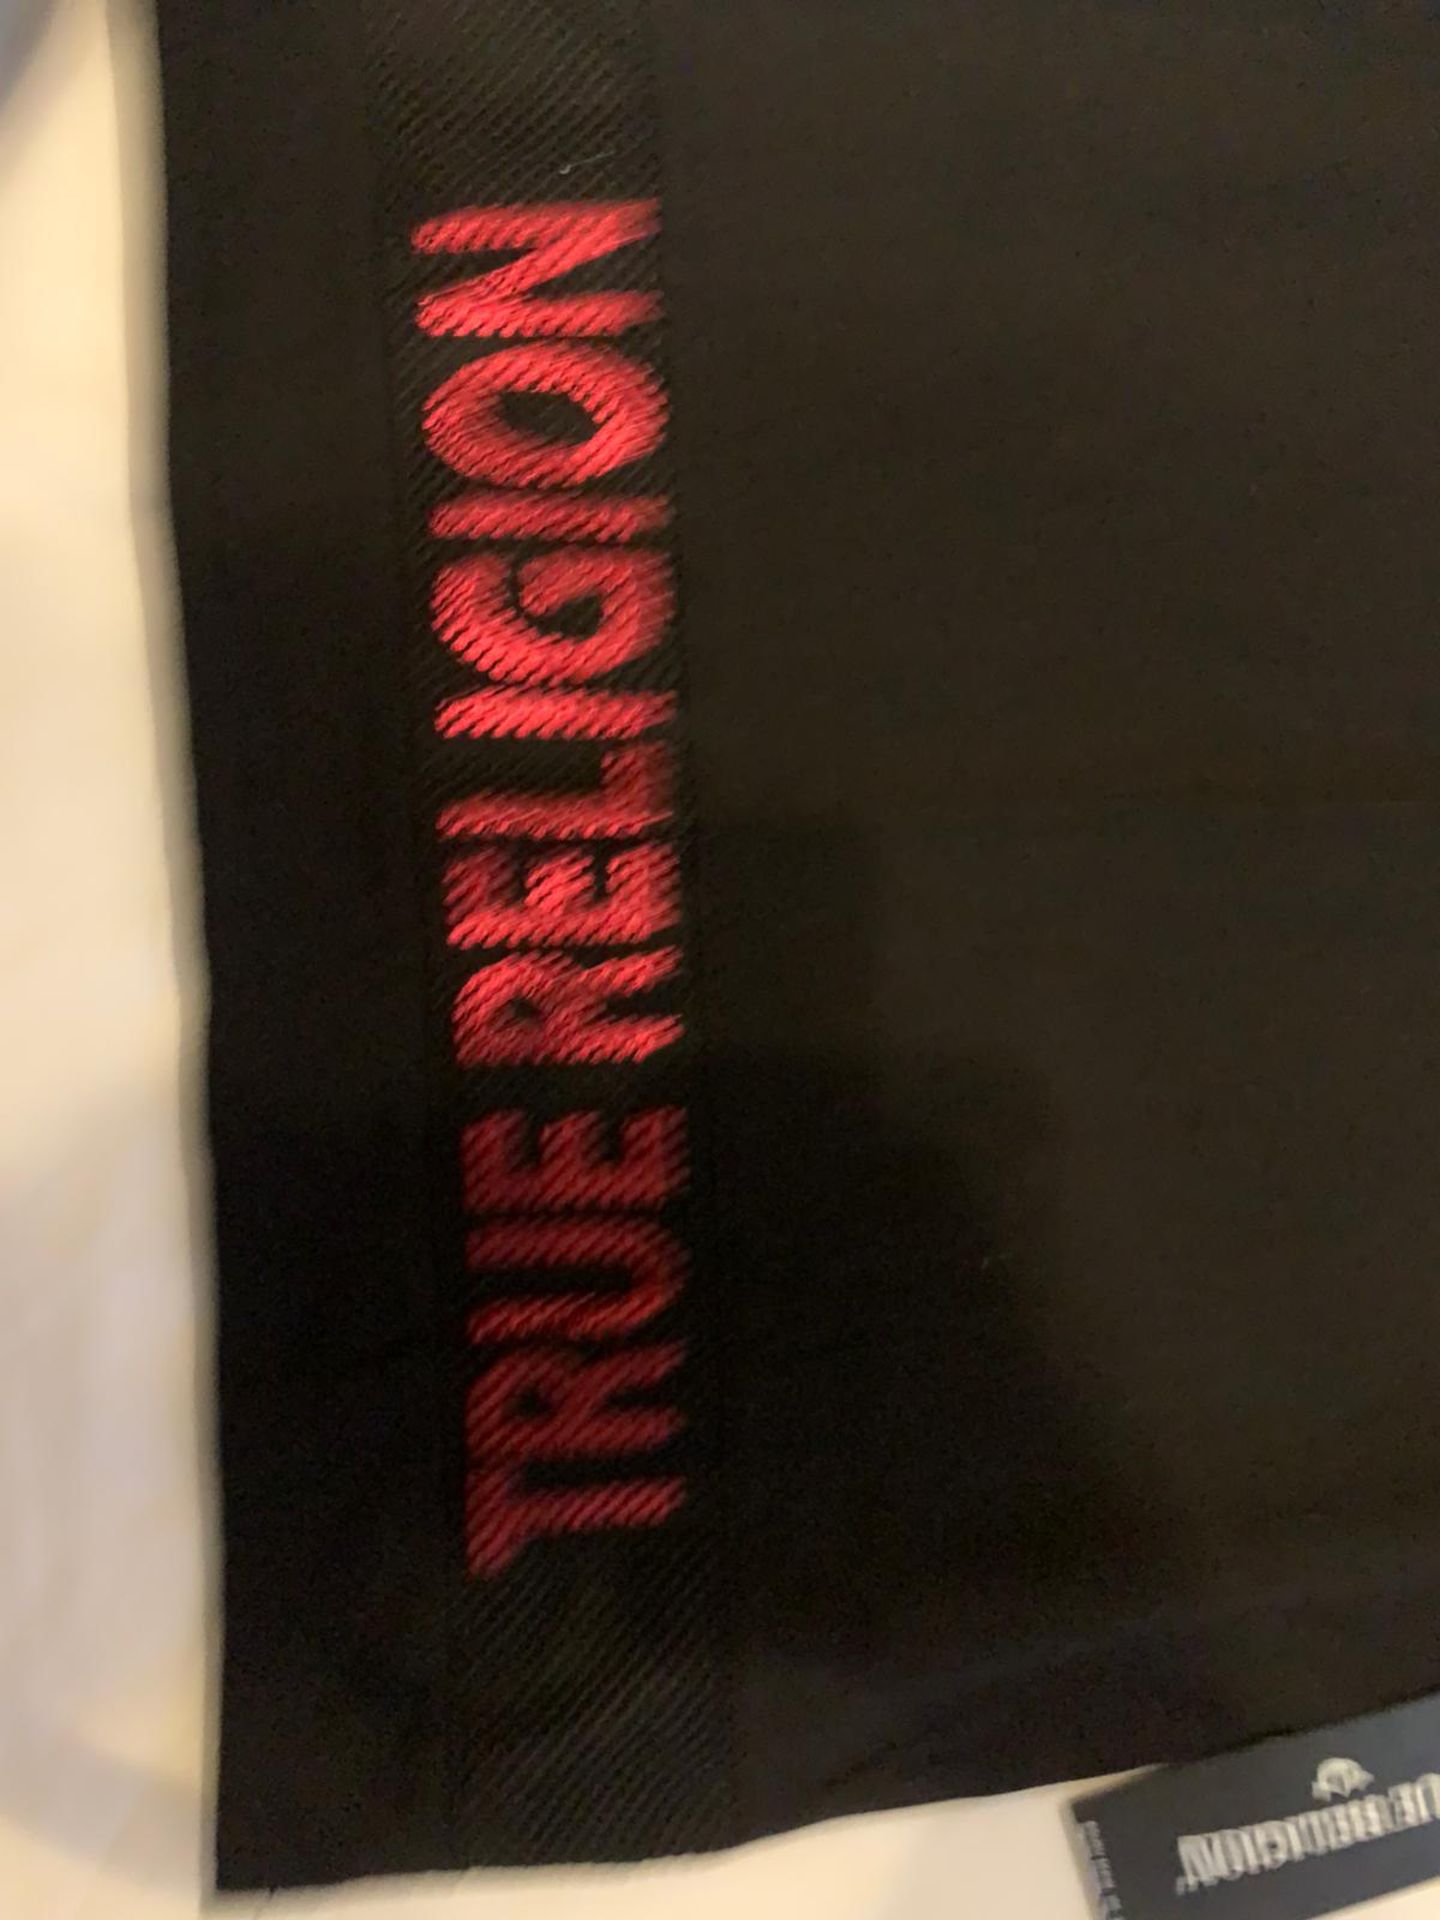 TRUE RELIGION HIGH LOW TEE BLACK/RED FOIL - XL AGE 18-20 - Image 2 of 2